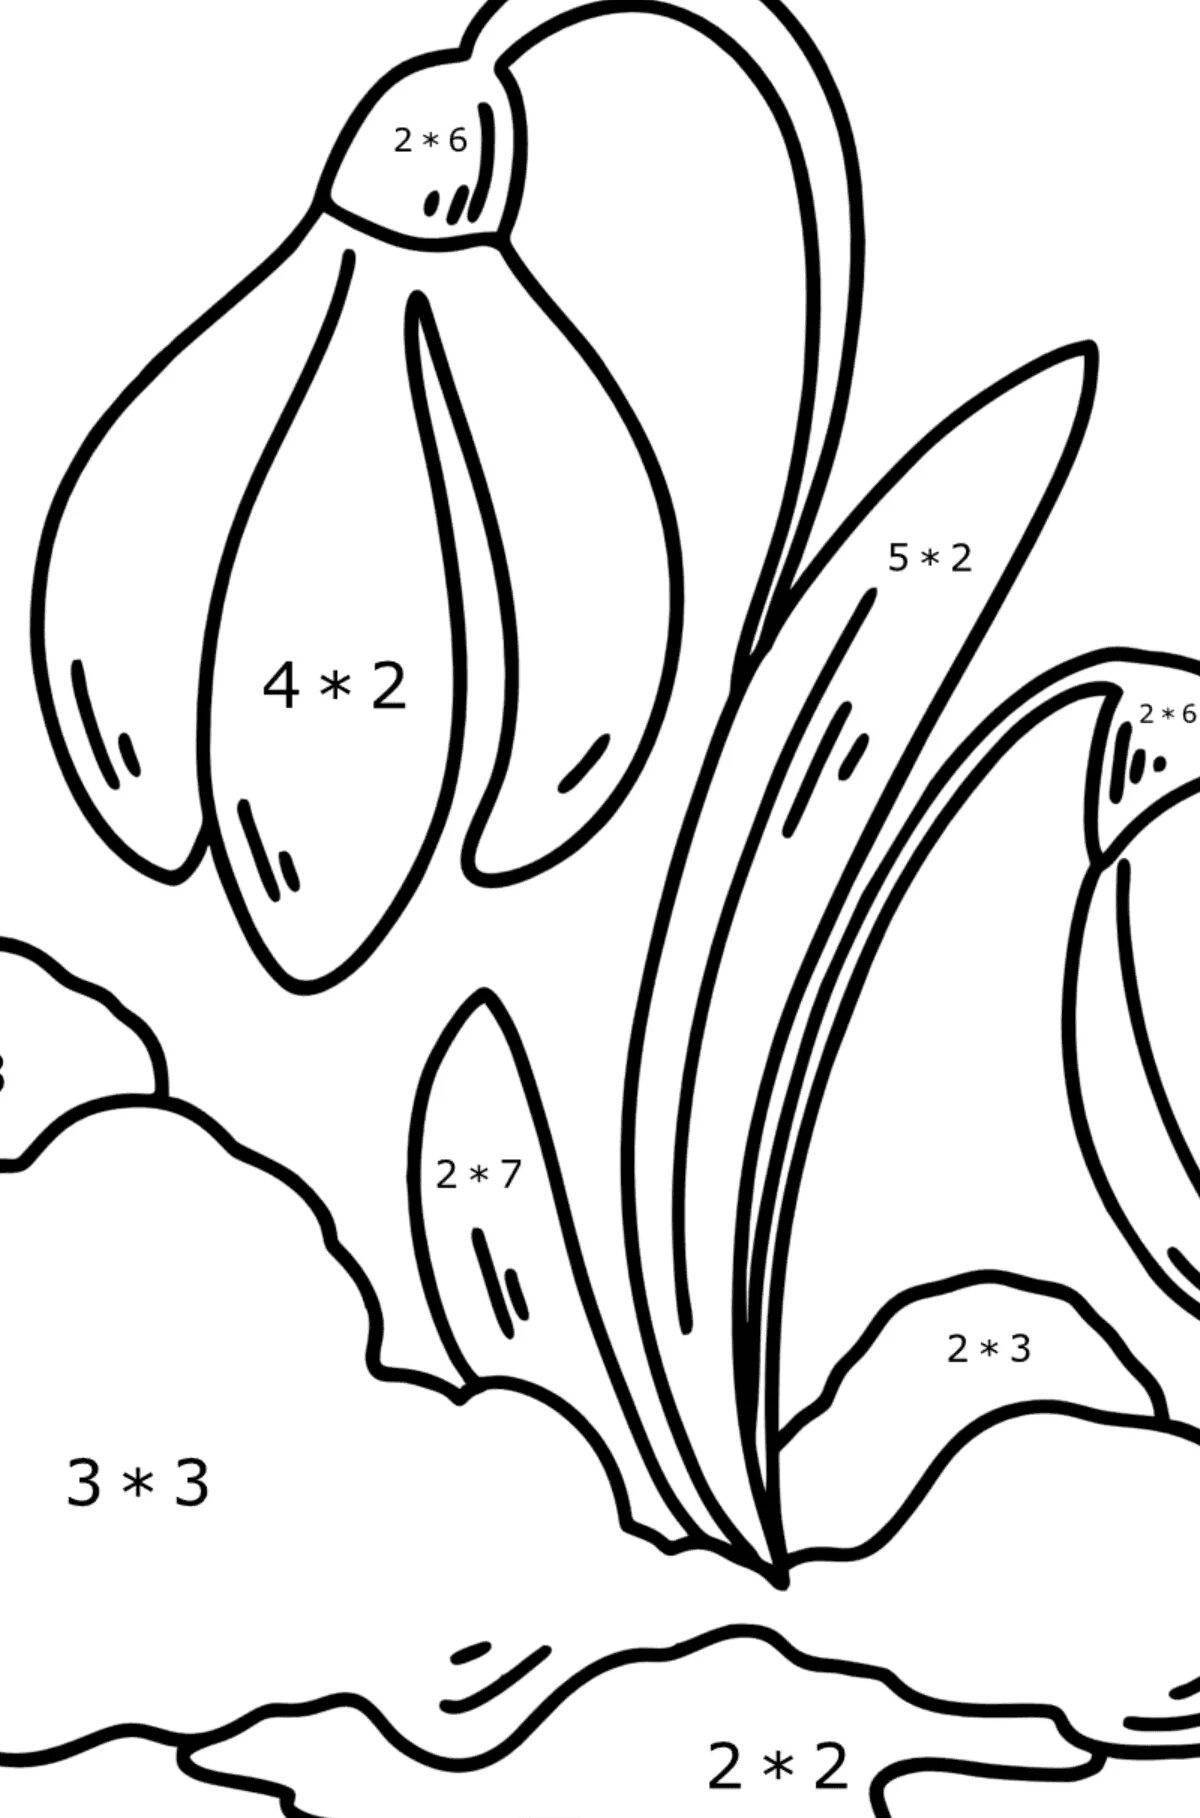 Funny snowdrops coloring for kids